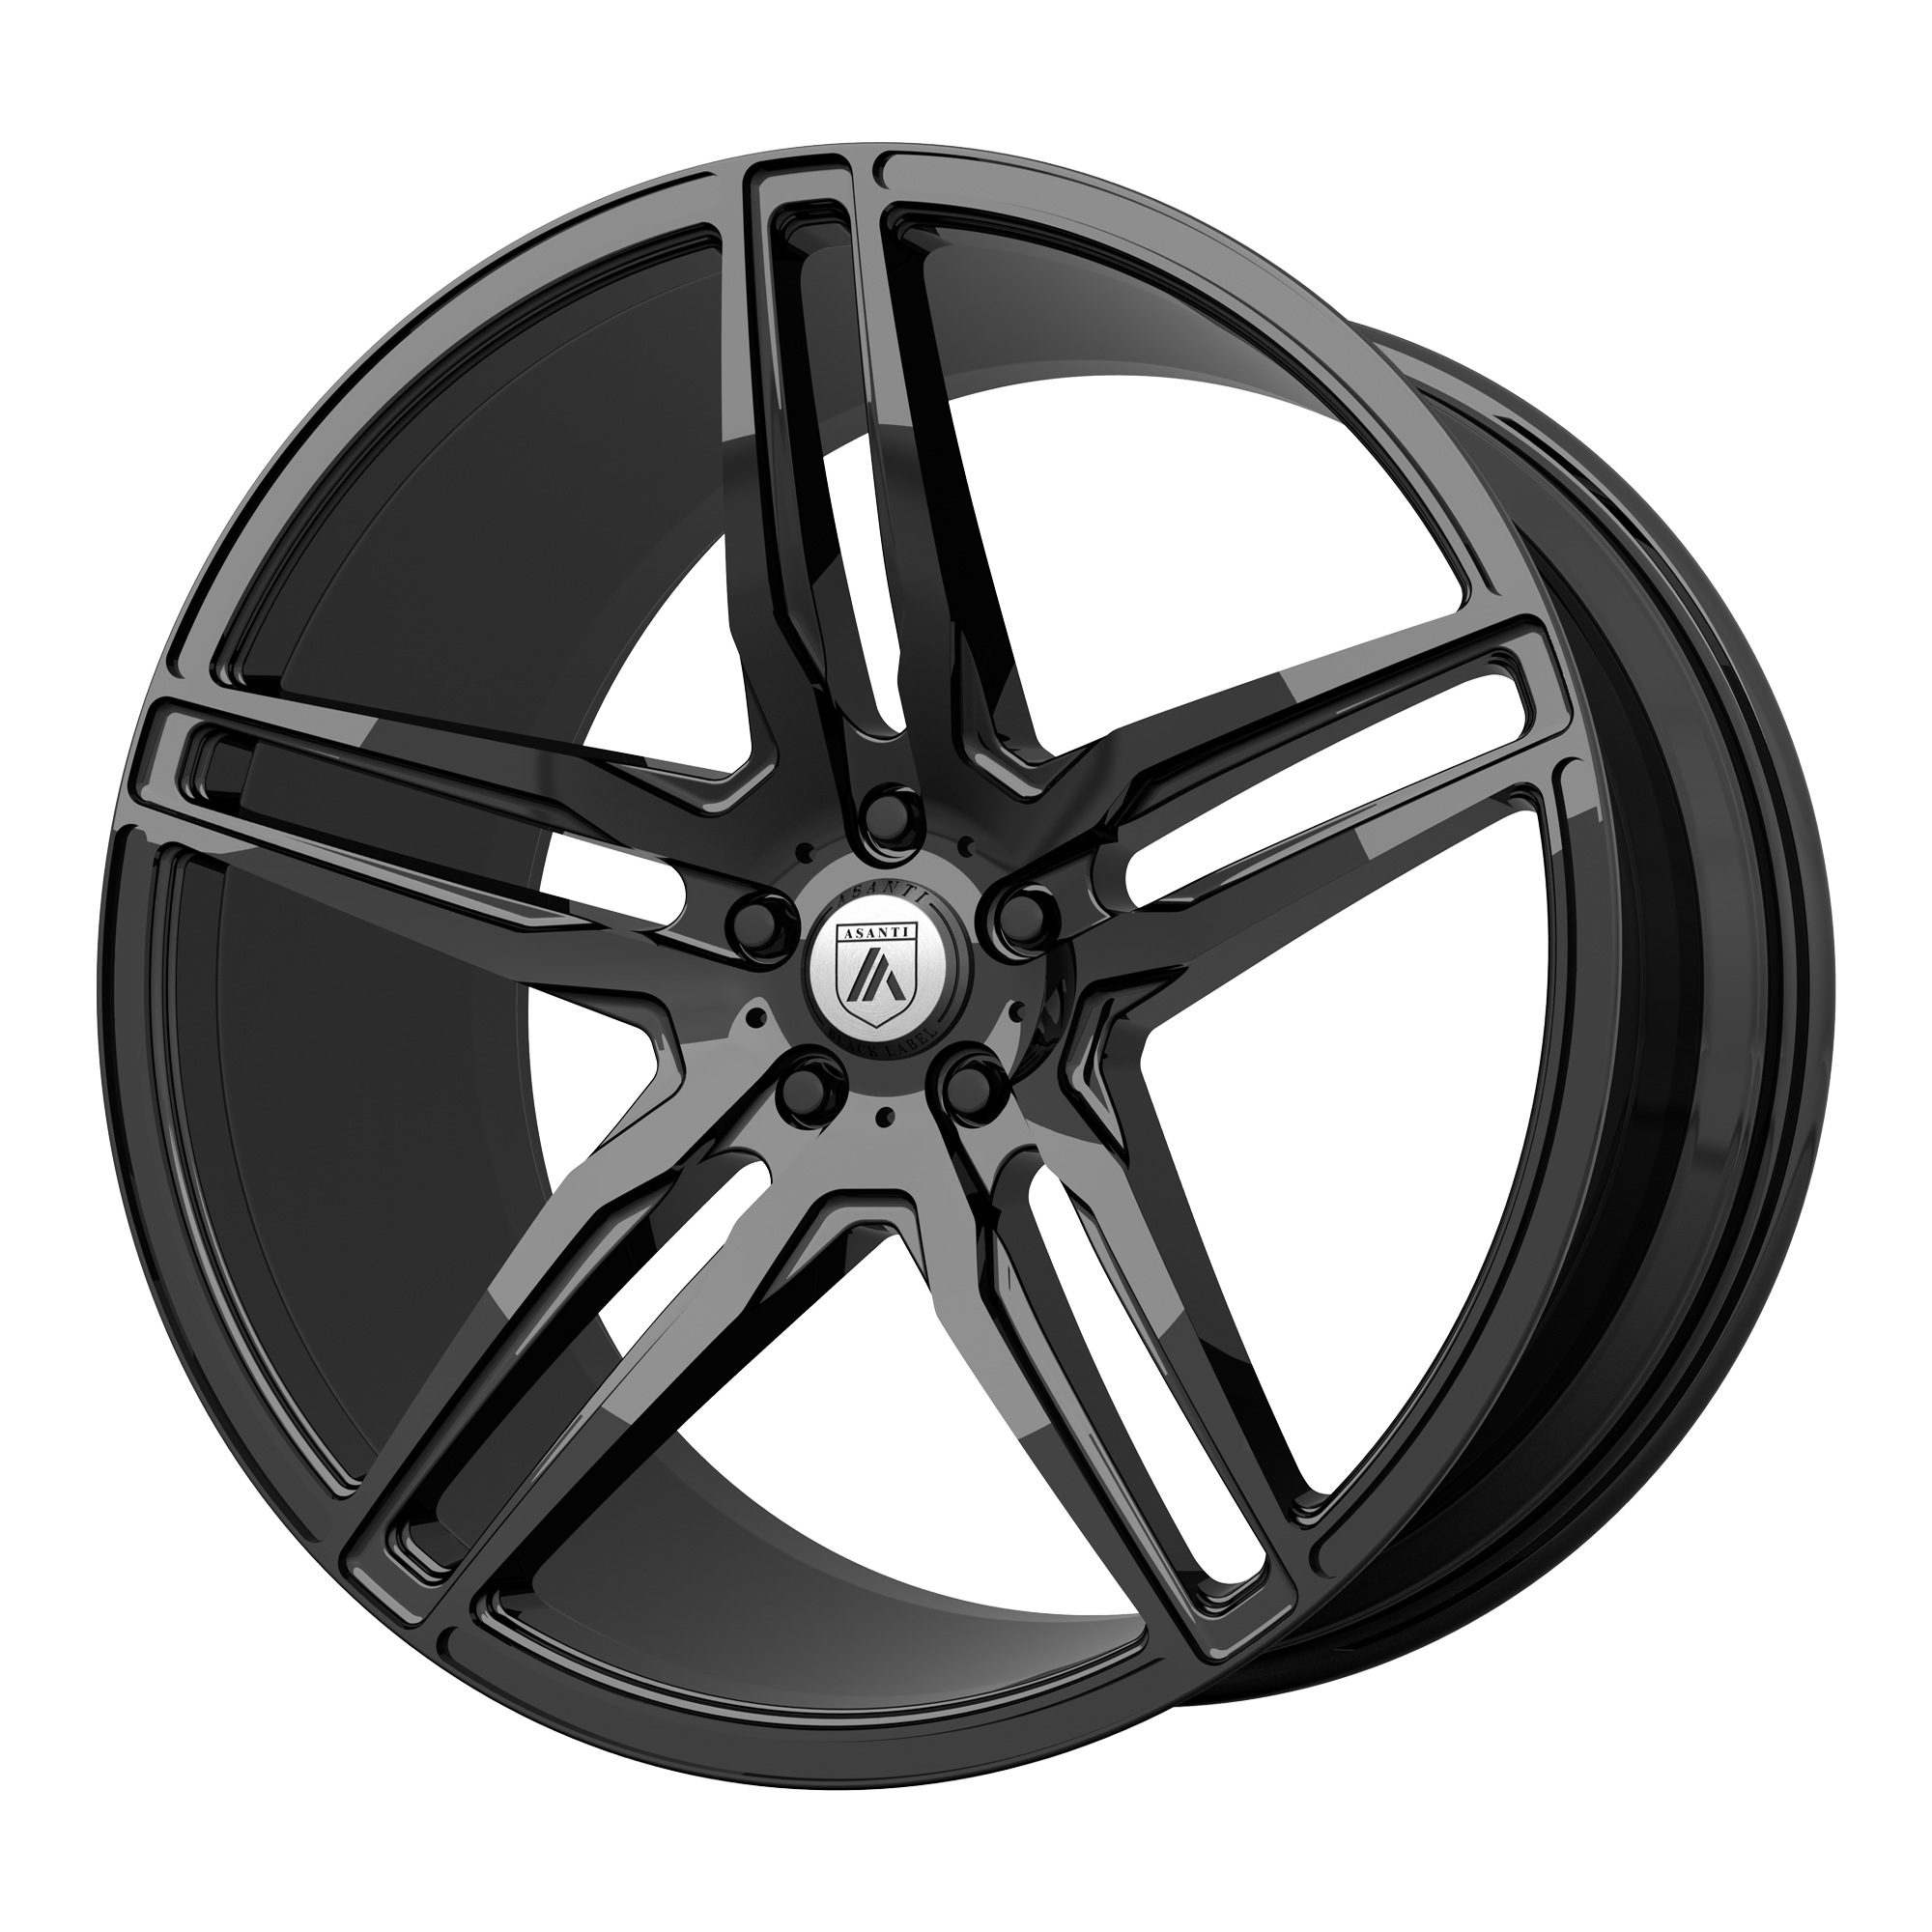 ORION 22x10.5 Blank GLOSS BLACK (25.00 - 34.00 mm) - Tires and Engine Performance